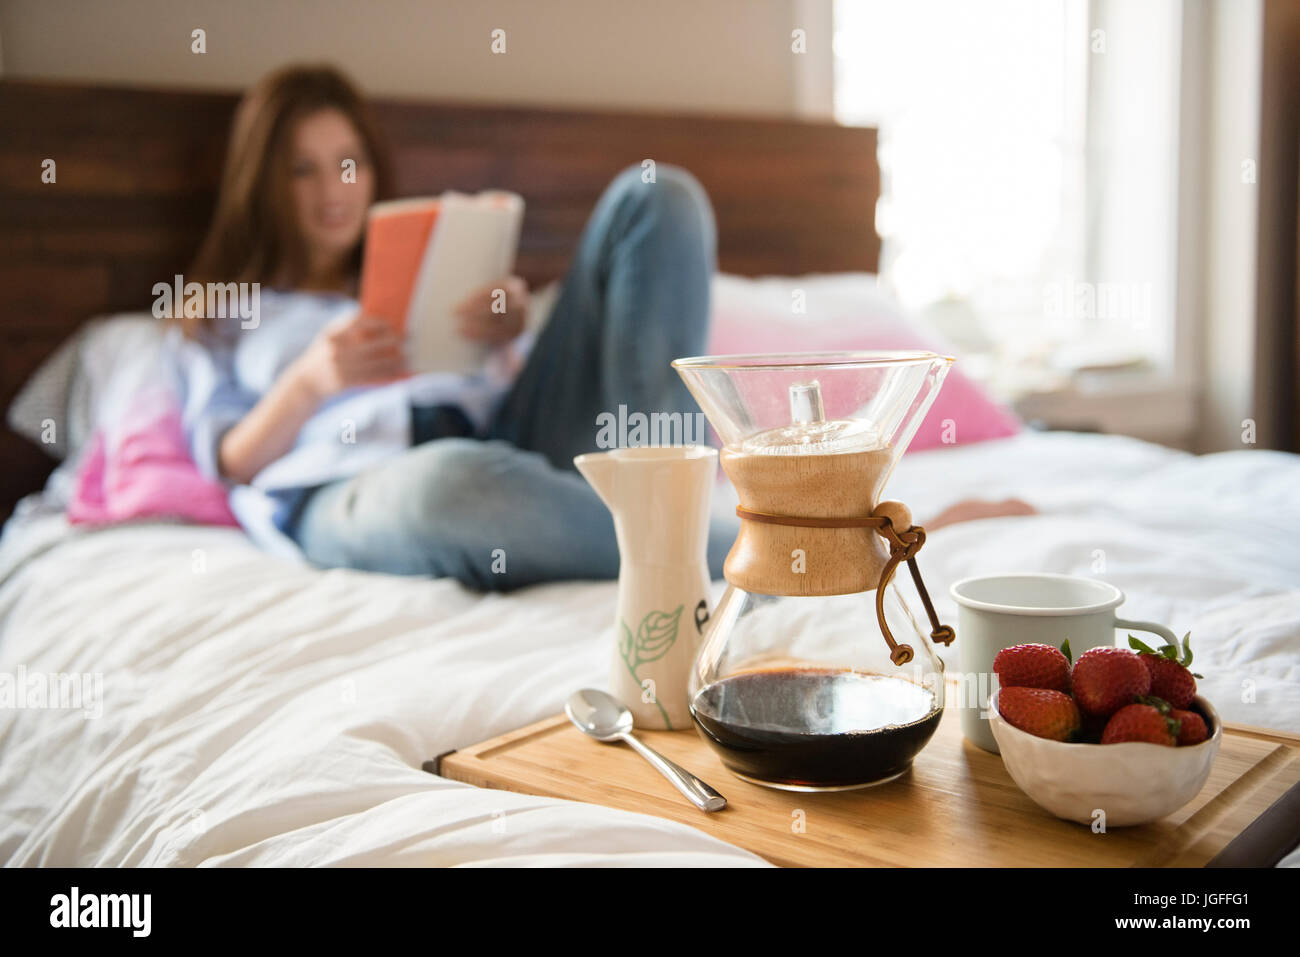 Caucasian woman laying in bed reading book near breakfast tray Stock Photo